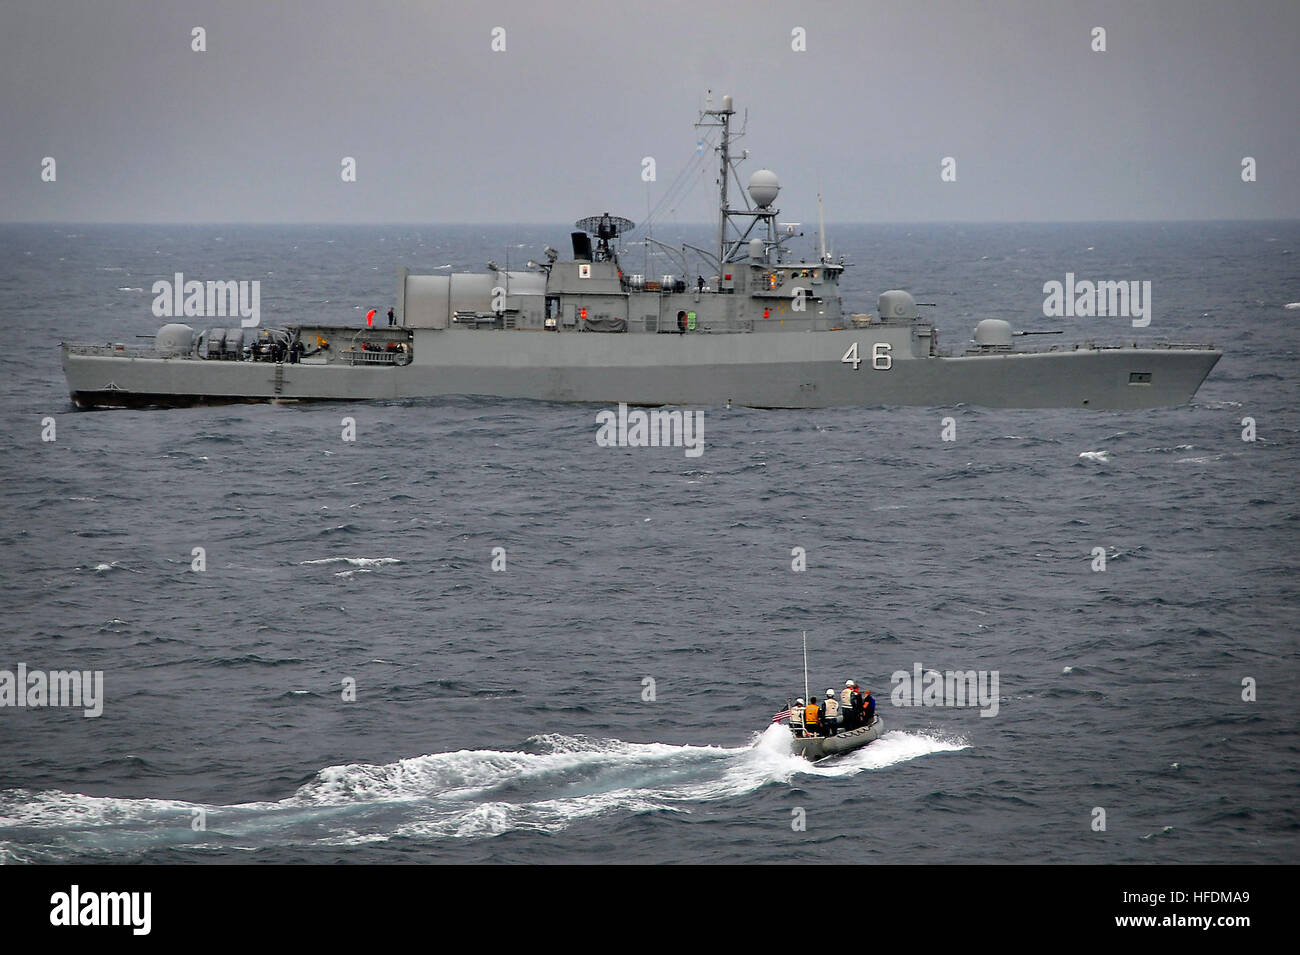 100309-N-4774B-089 ATLANTIC OCEAN (March 9, 2010) A rigid-hull inflatable boat from the guided-missile cruiser USS Bunker Hill (CG 52) approaches the Argentina Navy Espora-class frigate ARA Gomez Roca (P 46) during a passenger exchange. Bunker Hill, along with the aircraft carrier USS Carl Vinson (CVN 70), is participating in Southern Seas 2010, an operation directed by U.S. Southern Command that provides U.S. and other forces the opportunity to operate in a multi-national environment. (U.S. Navy photo by Mass Communication Specialist 2nd Class Daniel Barker/Released) ARA Gomez Roca (P-46) Stock Photo